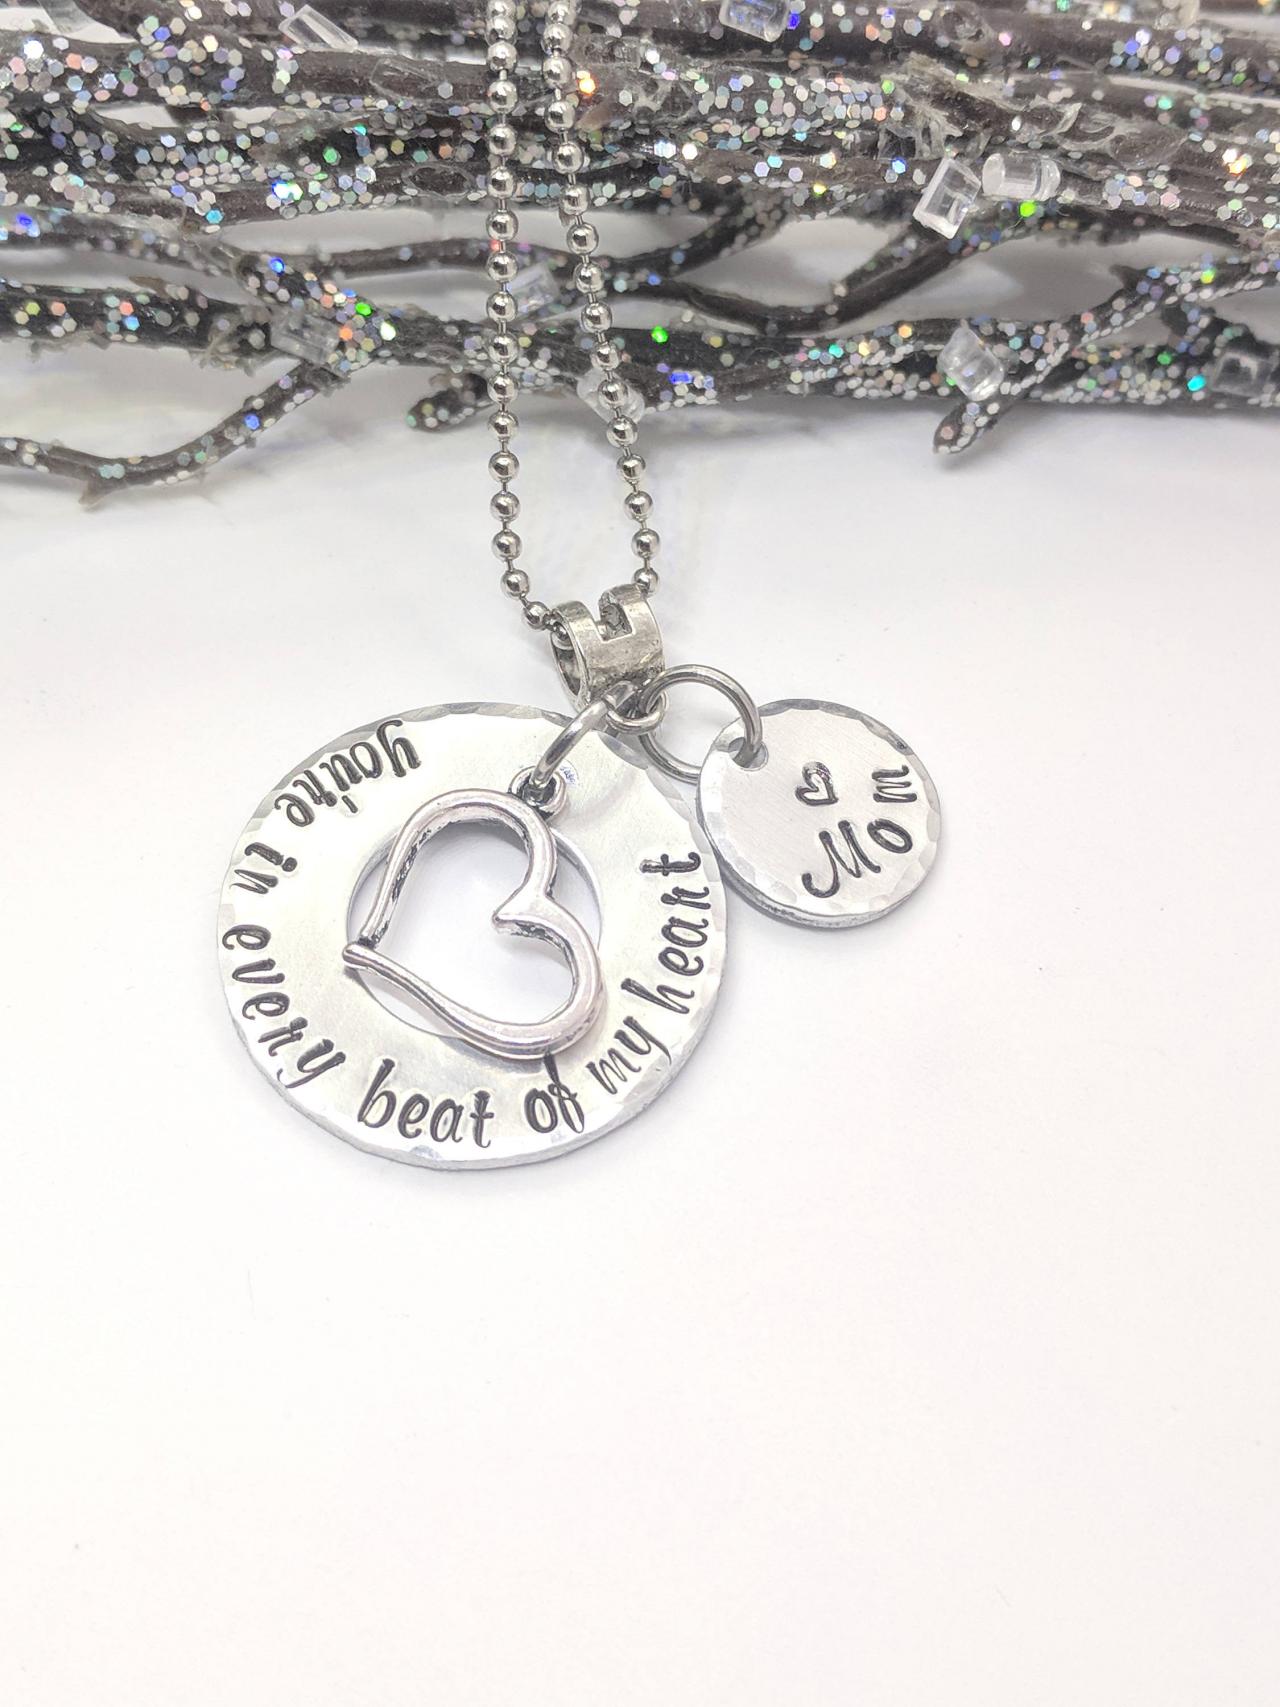 Loss Of Mother - In Memory Of Mom - Every Beat Of My Heart - Hand Stamped Necklace - Sympathy Gift - Funeral Gift - Remembrance Jewelry